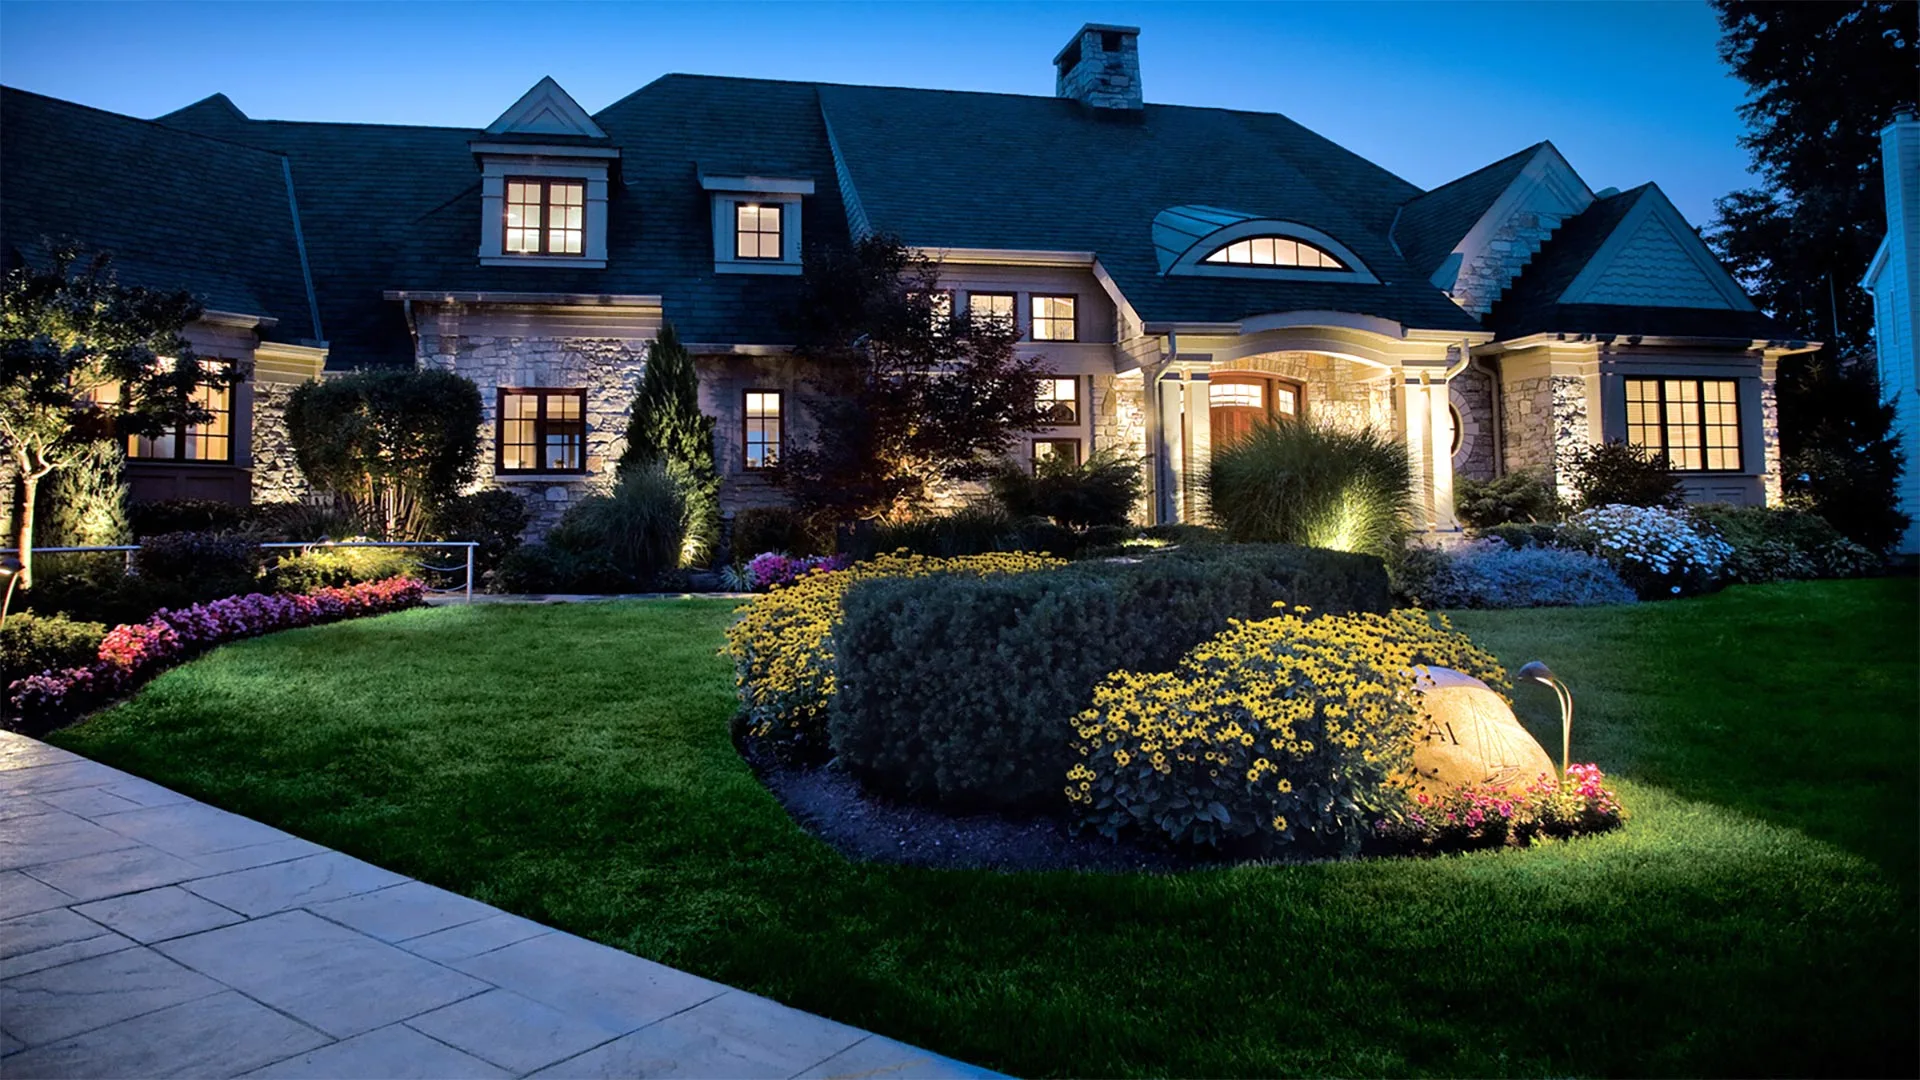 A home with outdoor lighting and landscaping in Adel, IA.